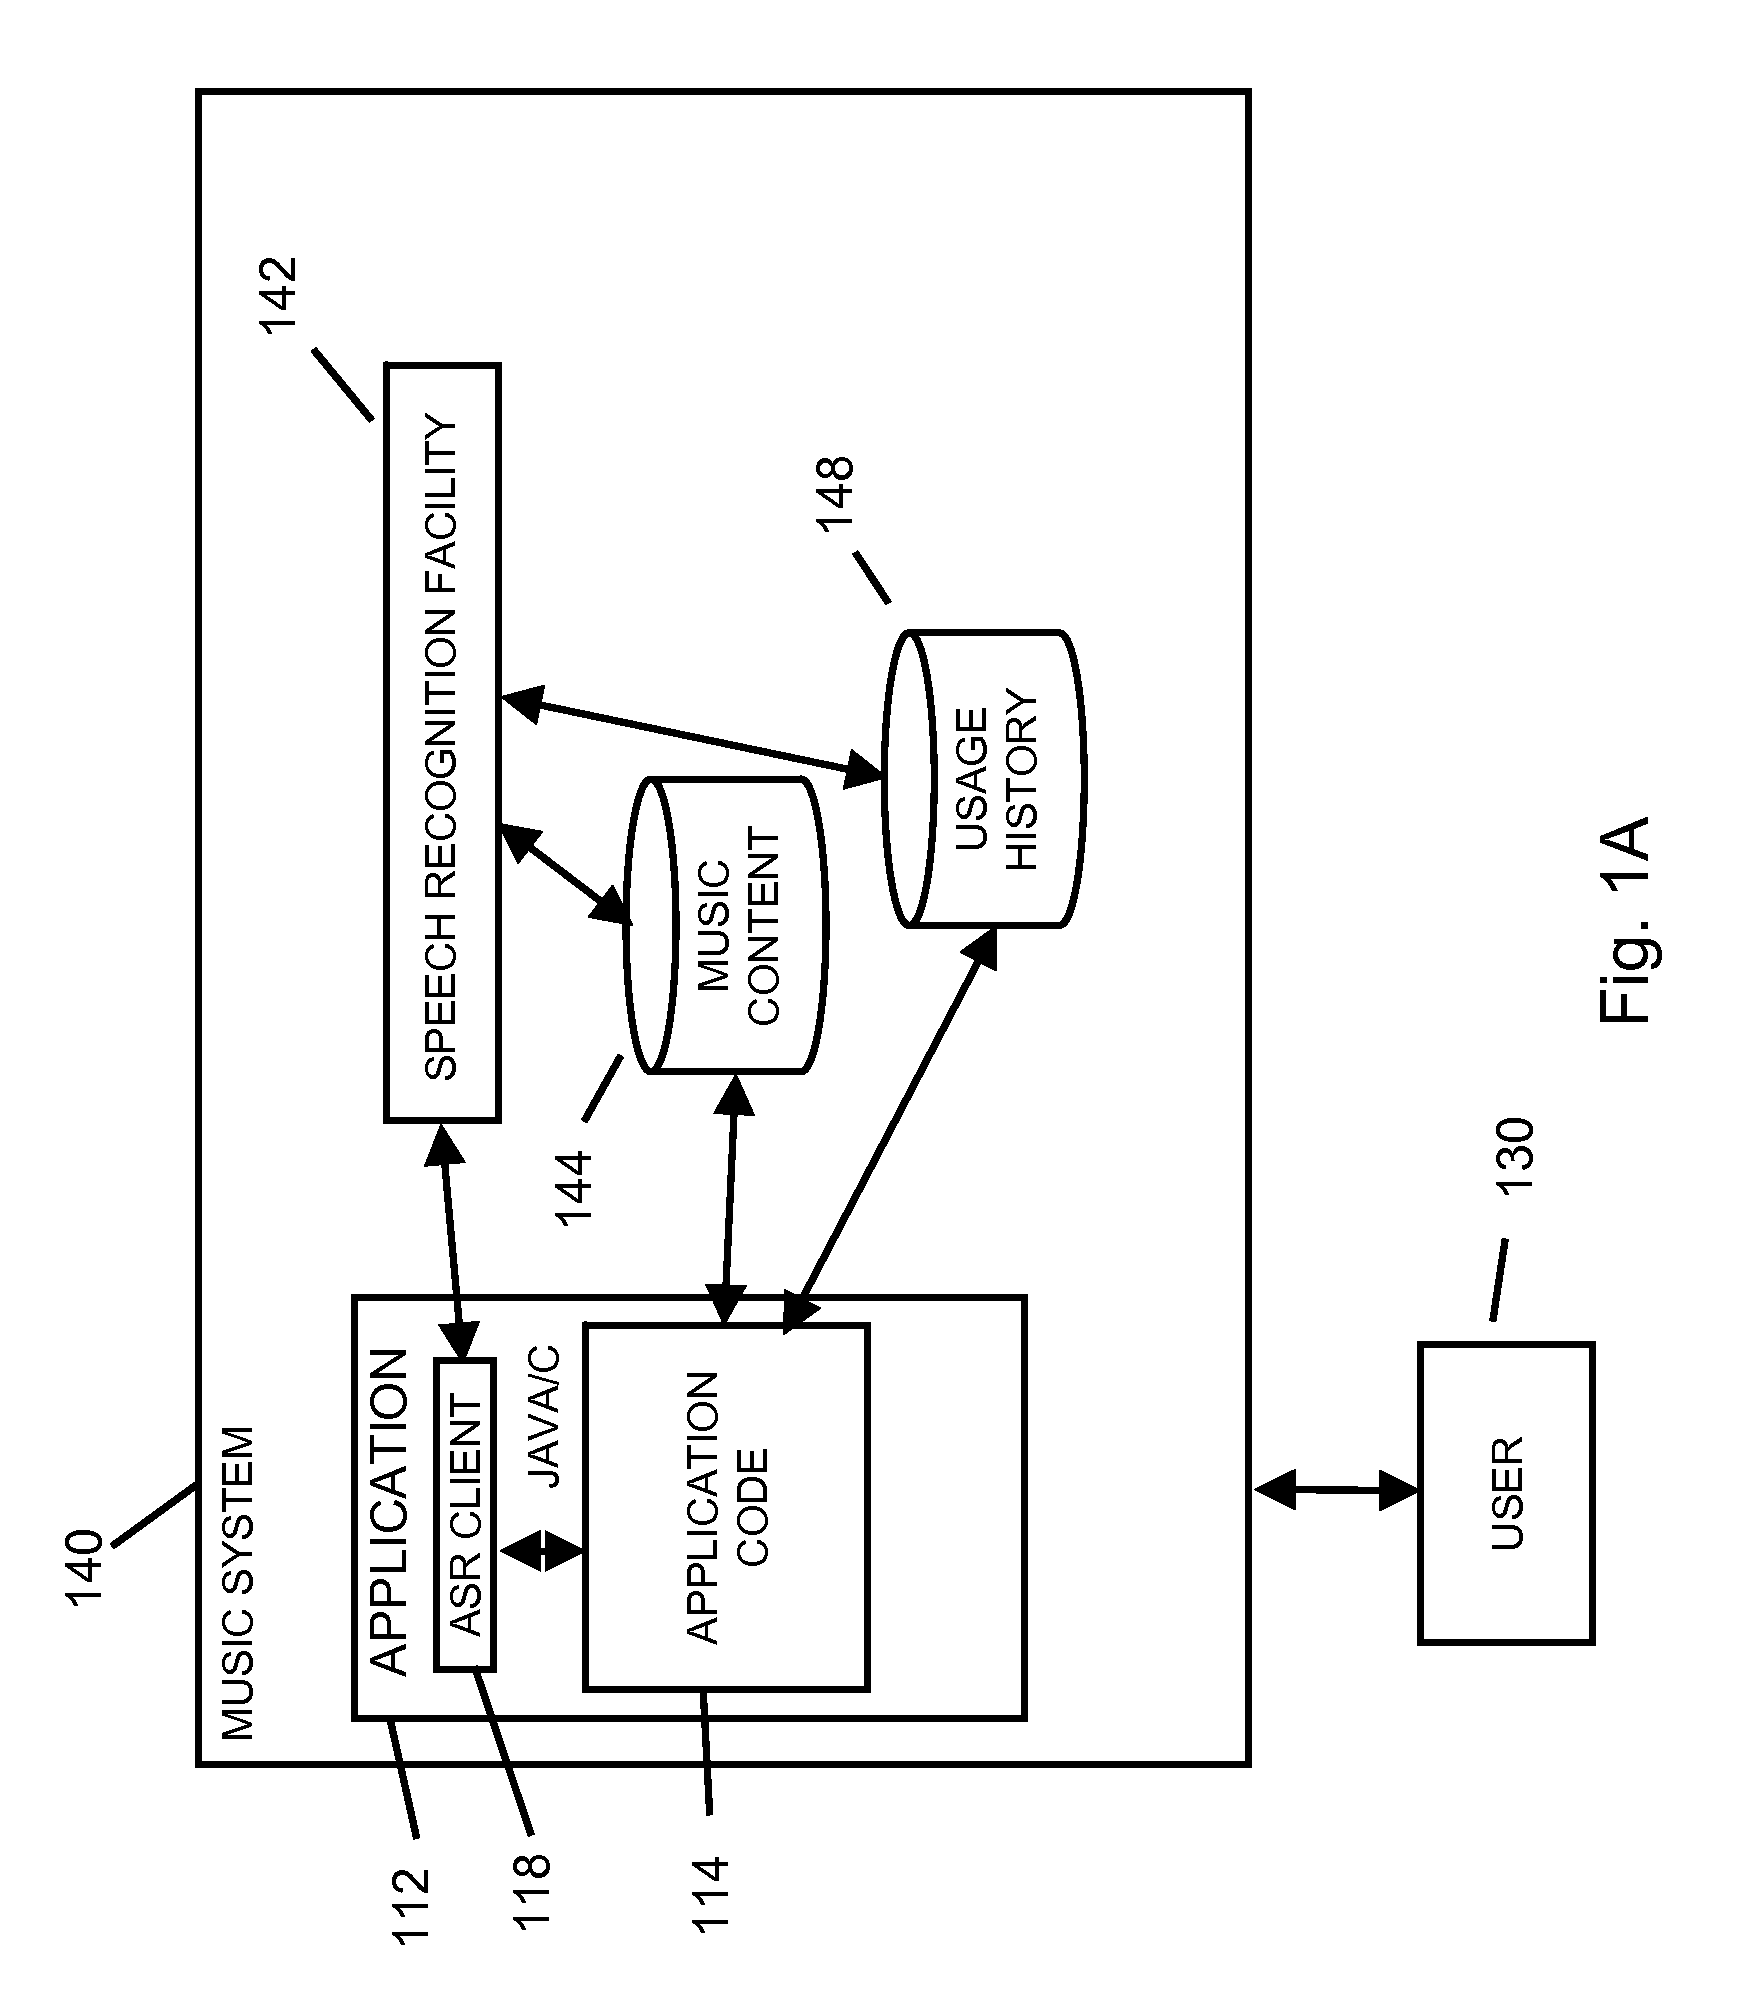 Using results of unstructured language model based speech recognition to control a system-level function of a mobile communications facility